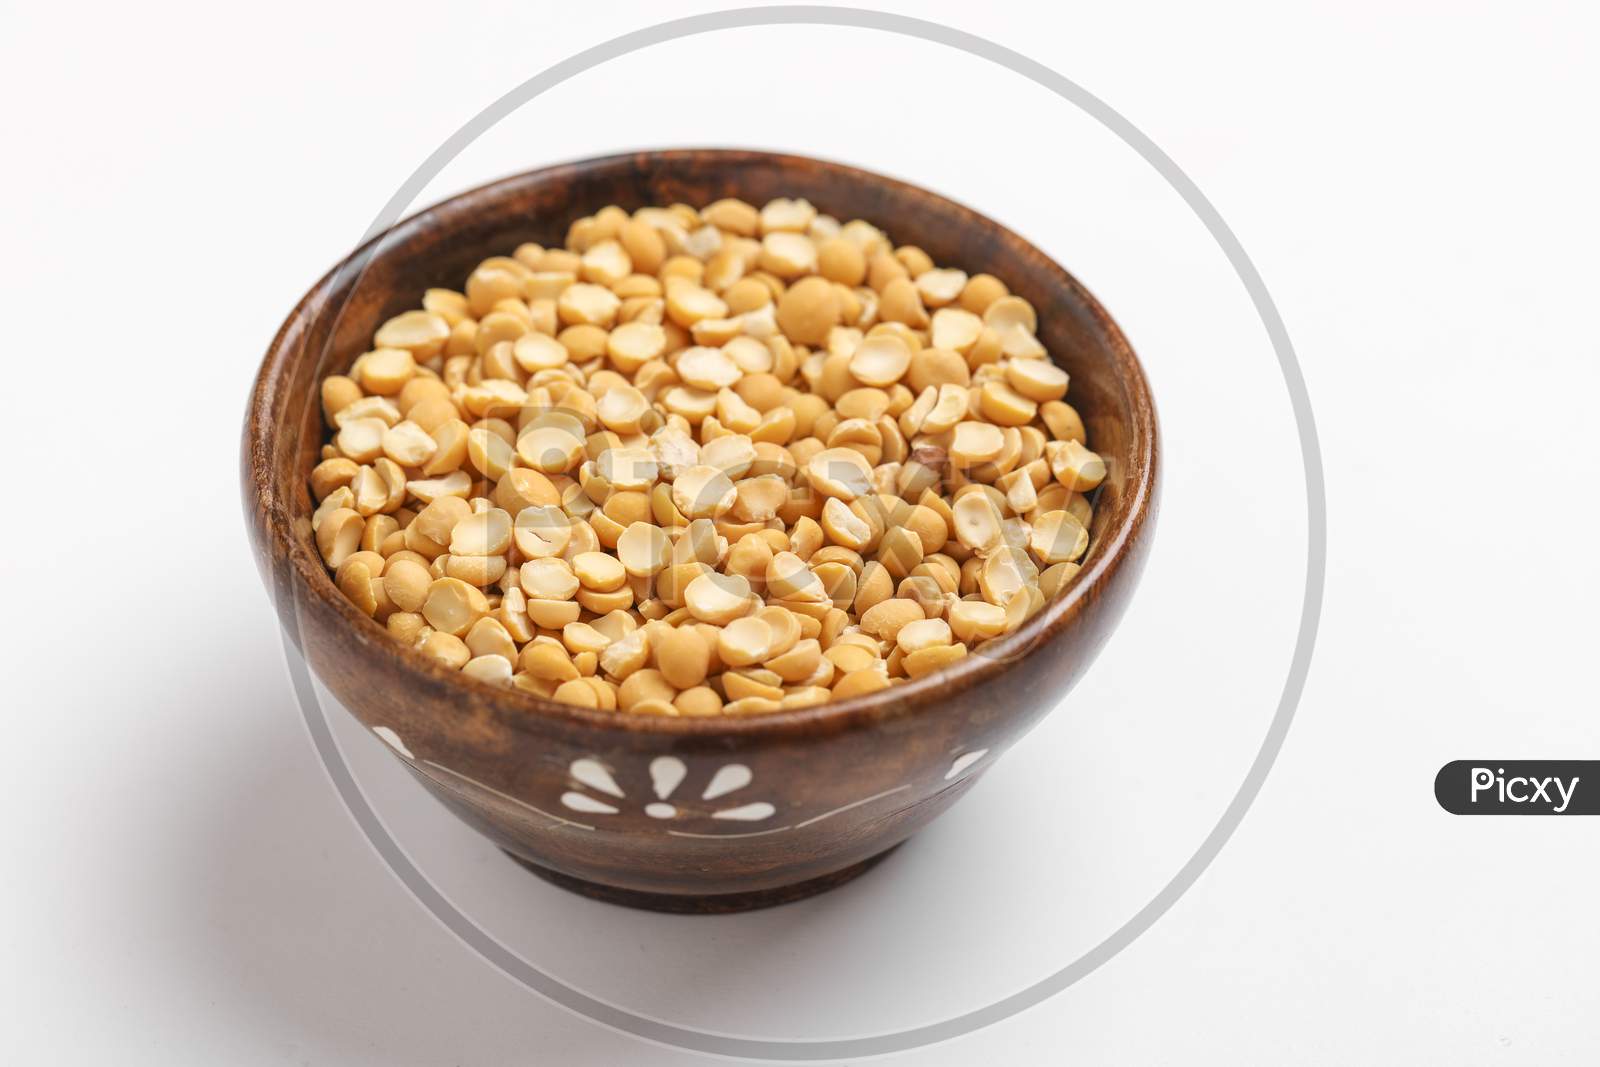 Dried Chickpea Lentils In Wooden Bowl On White Background , Split Chickpea Also Know As Chana Dal ,